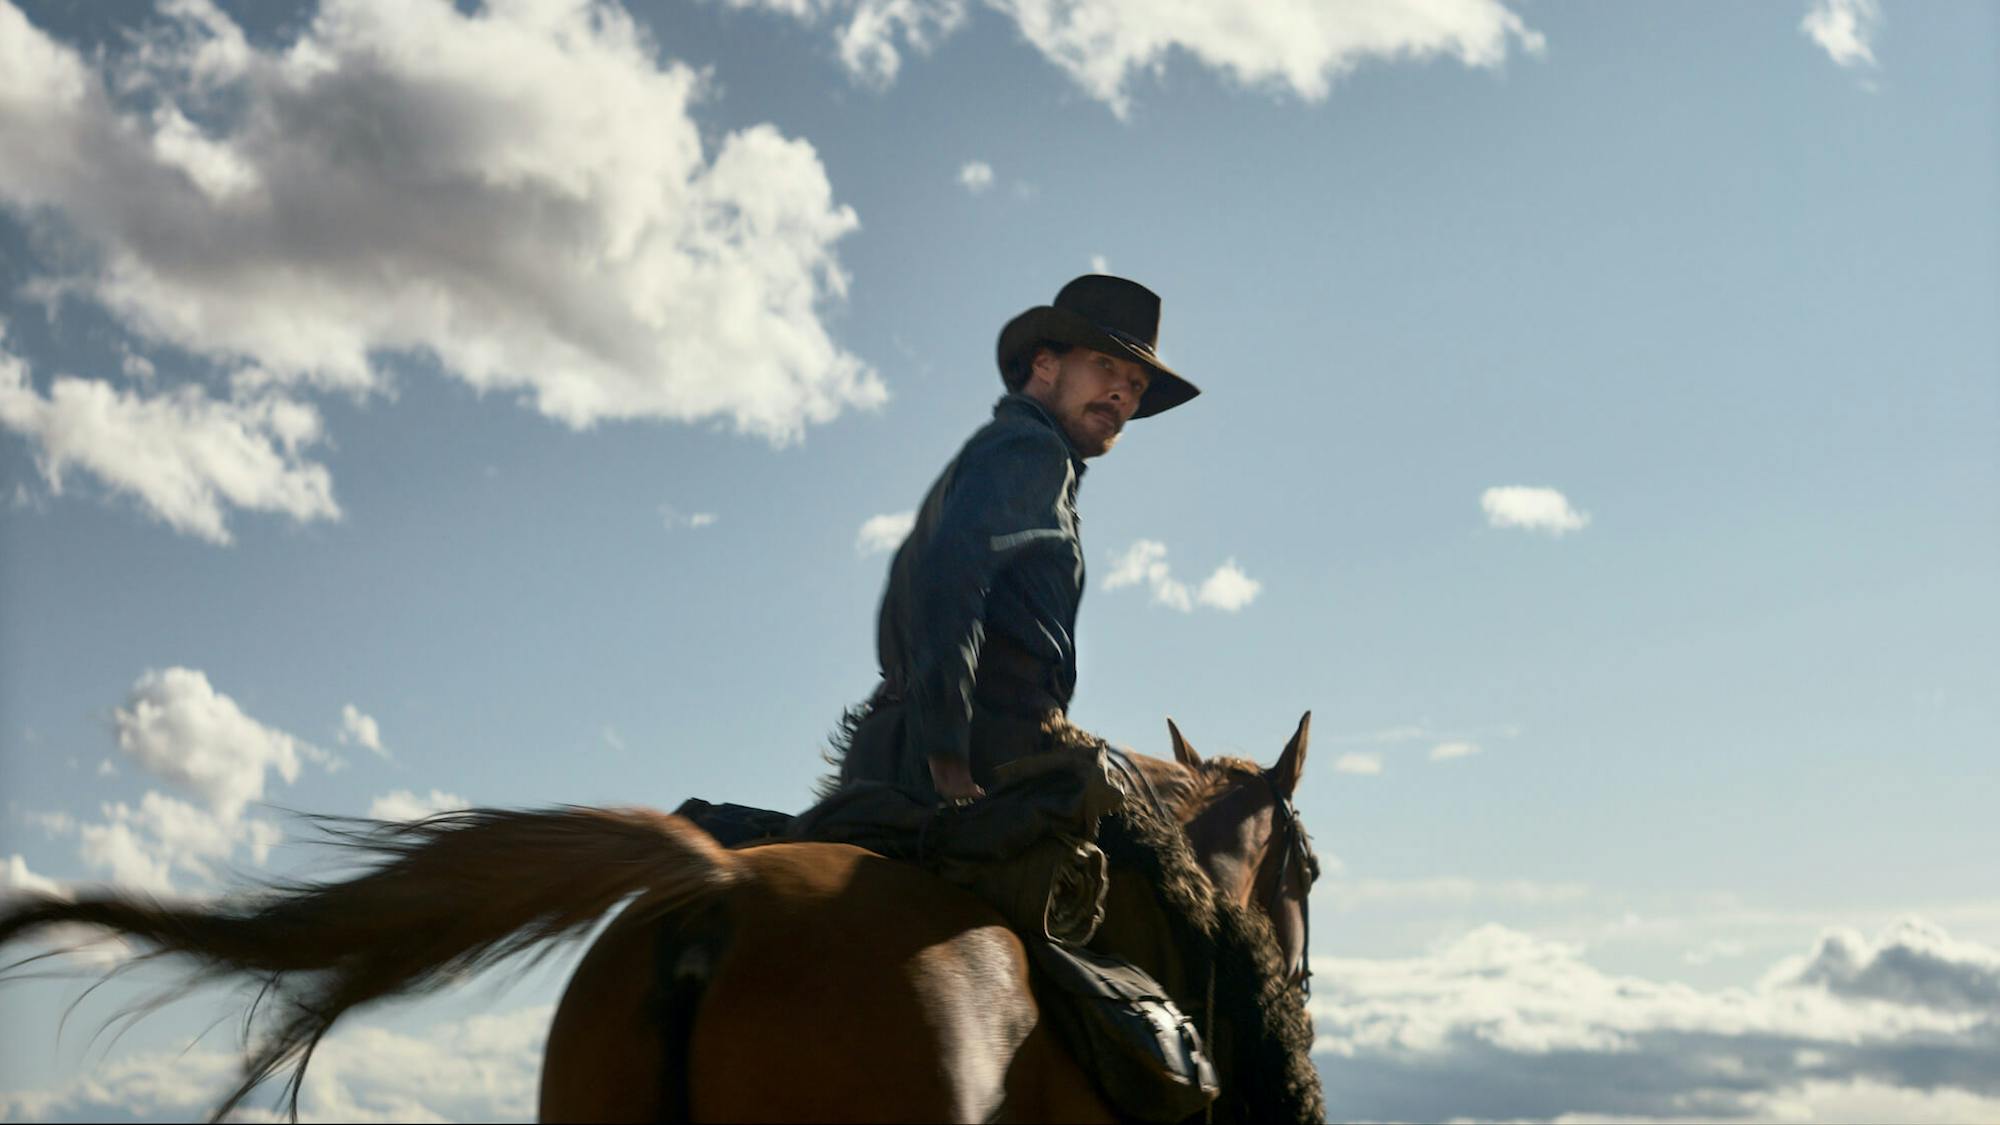 Phil Burbank (Benedict Cumberbatch) rides a brown horse in a denim shirt and brown hat. The sky is bright blue and streaked with puffy clouds.